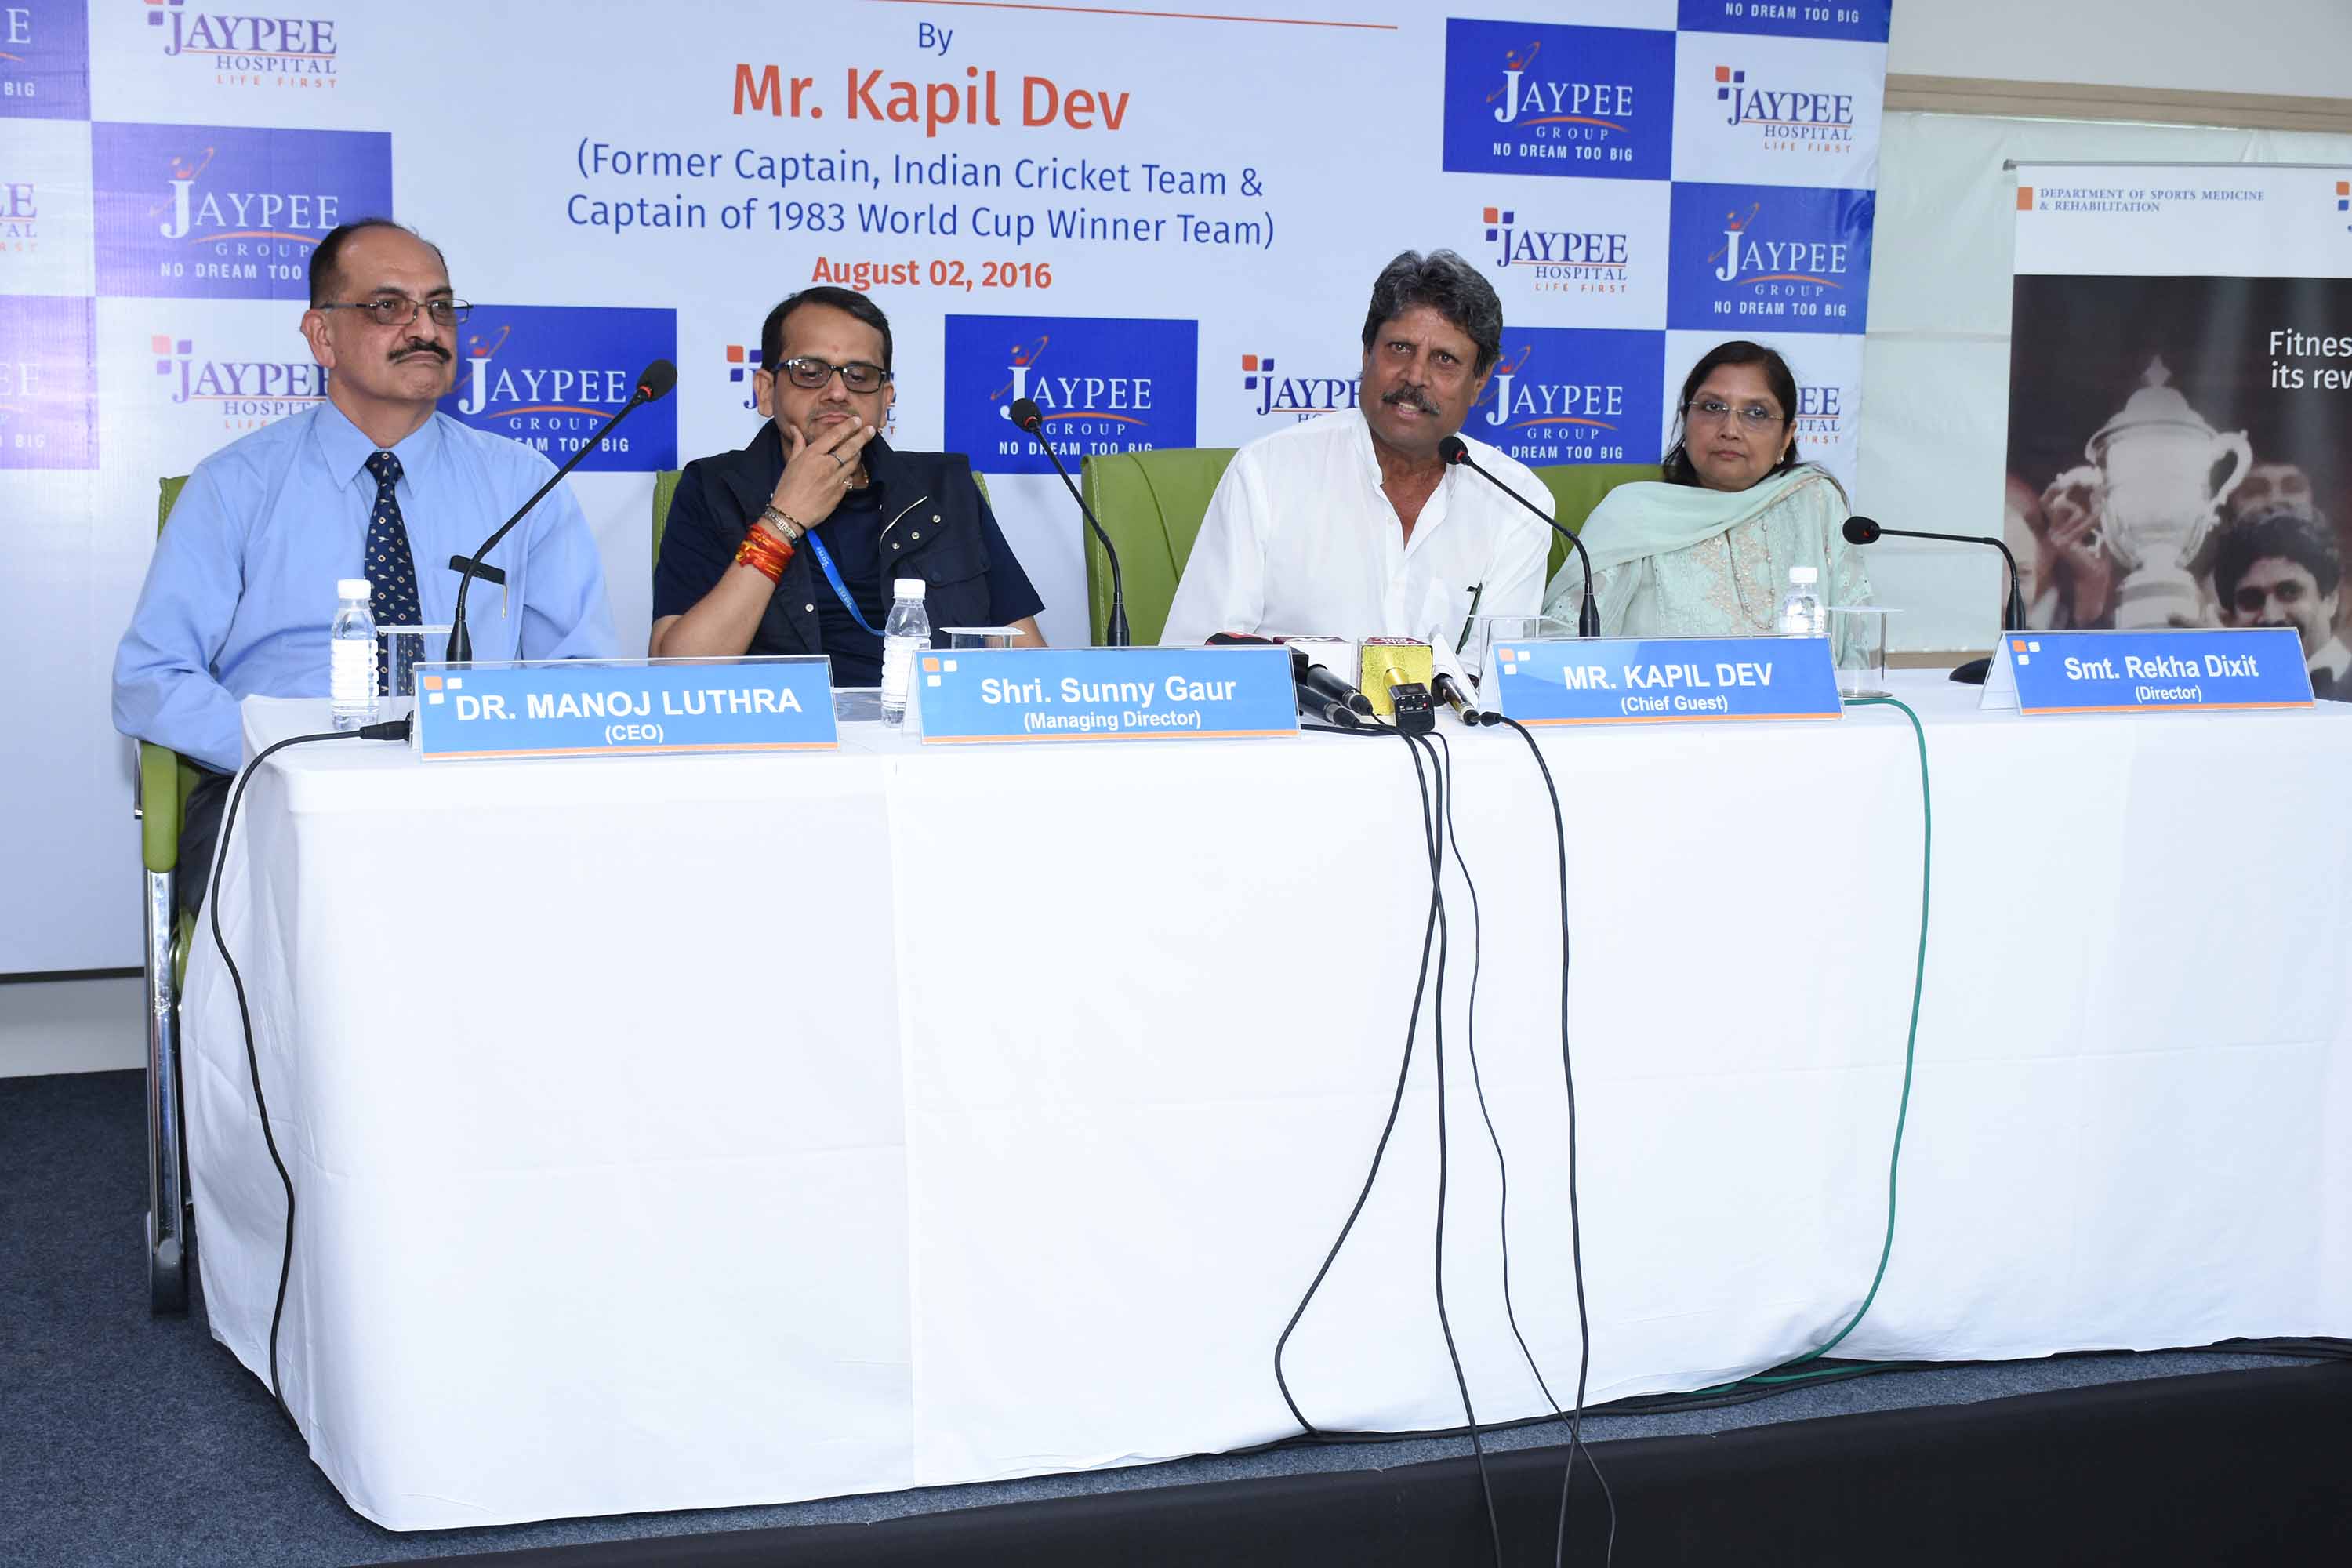 Jaypee Hospital launched sports medicine centre_Pic